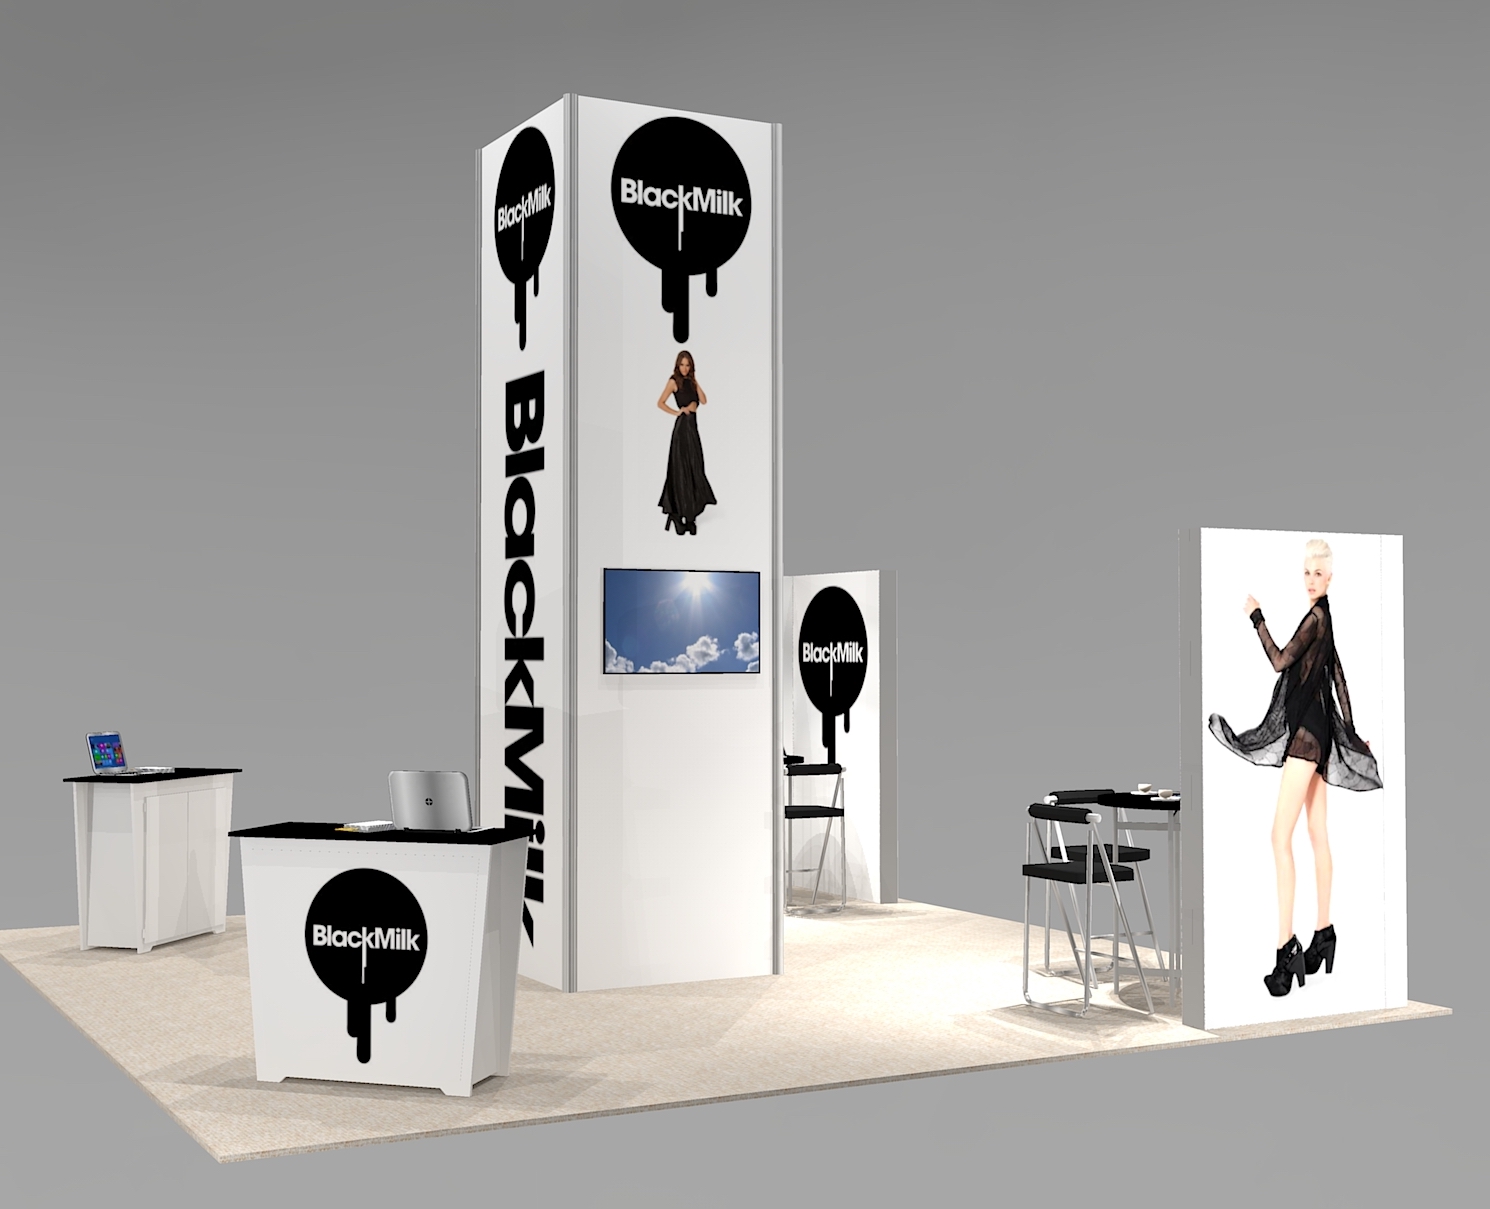 20x20 island booth space exhibit with meeting spaces